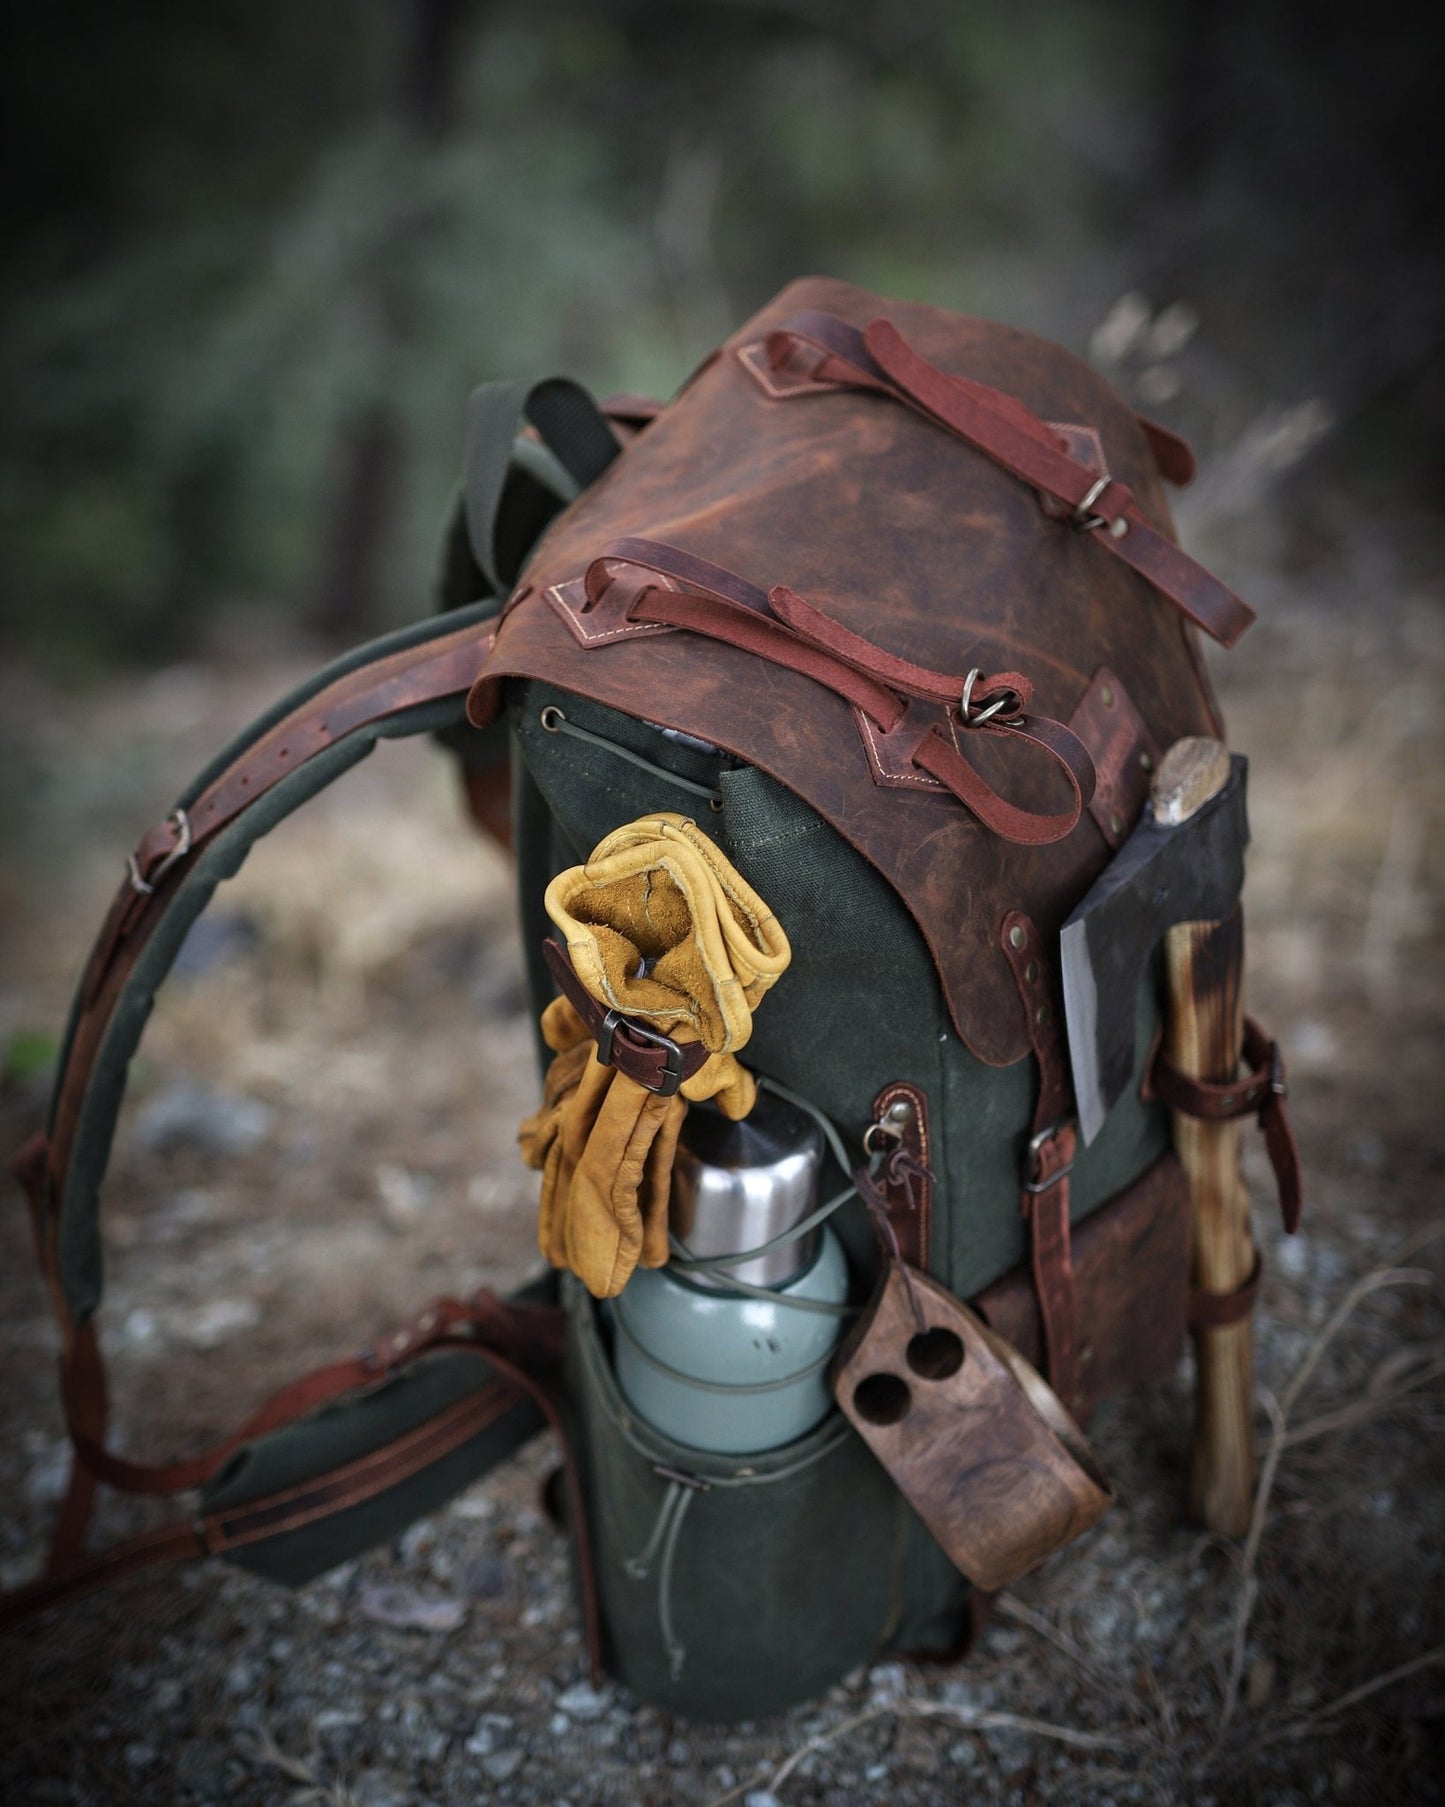 Bushcraft Backpack with Axe Holder | Handmade | Leather | Waxed Canvas Backpack | Camping, Hunting, Bushcraft, Travel  | Personalization bushcraft - camping - hiking backpack 99percenthandmade   